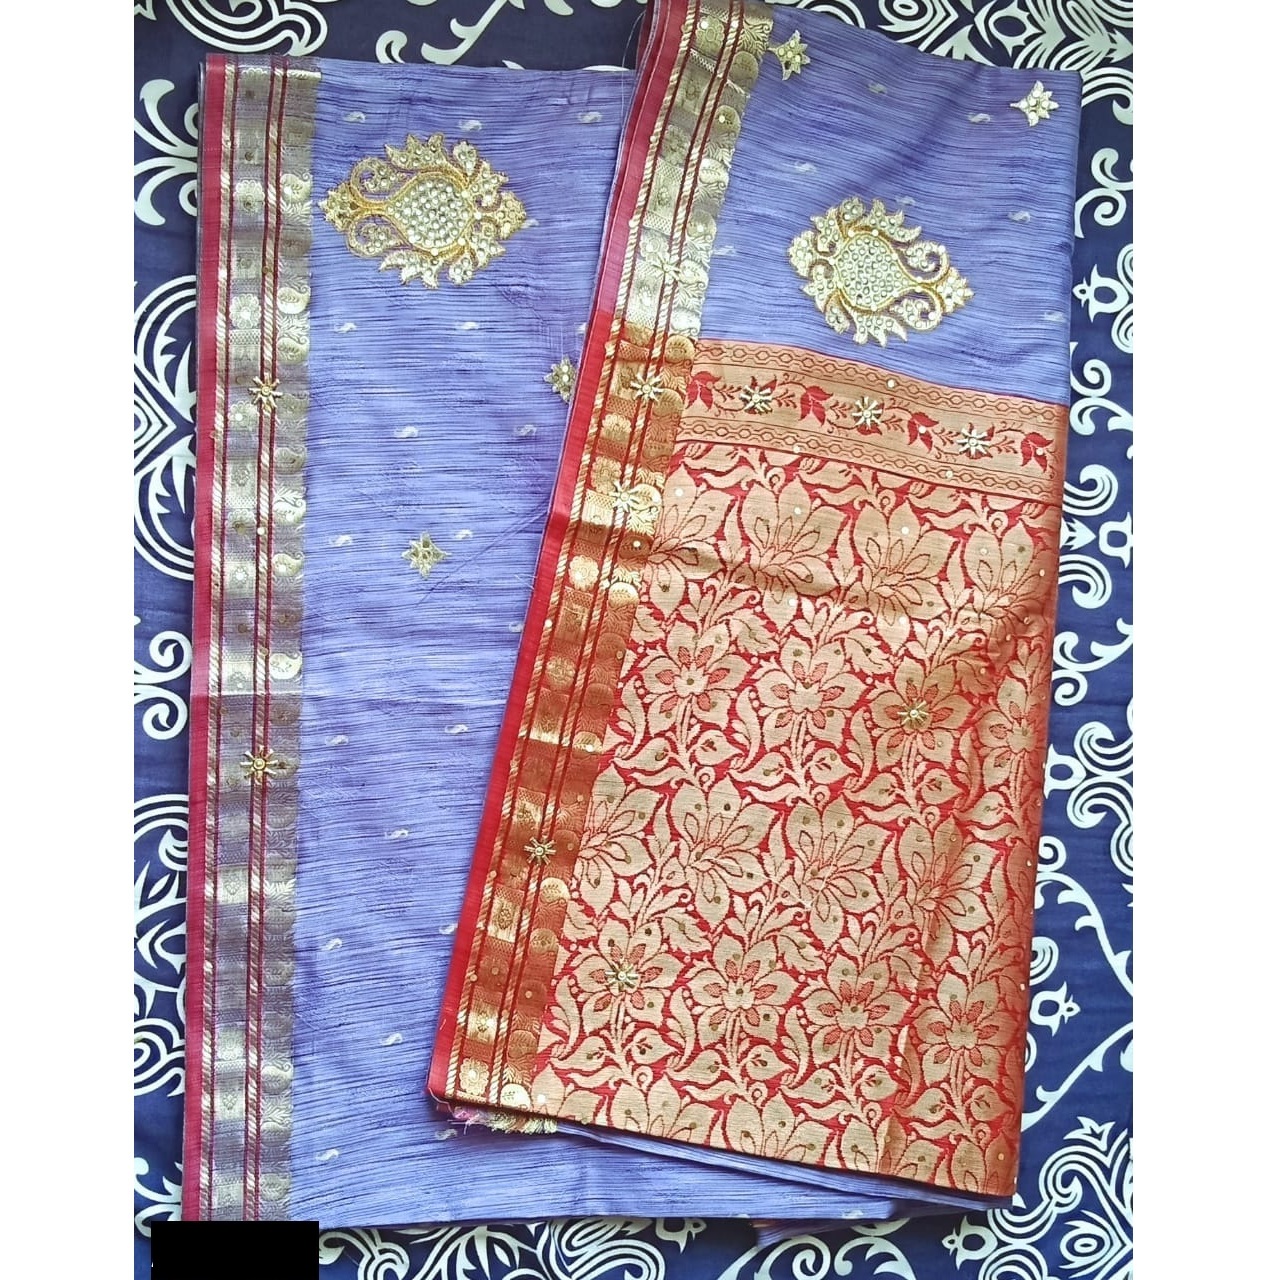 Cheap Saree/ Indian wear starting from AED 10 !!